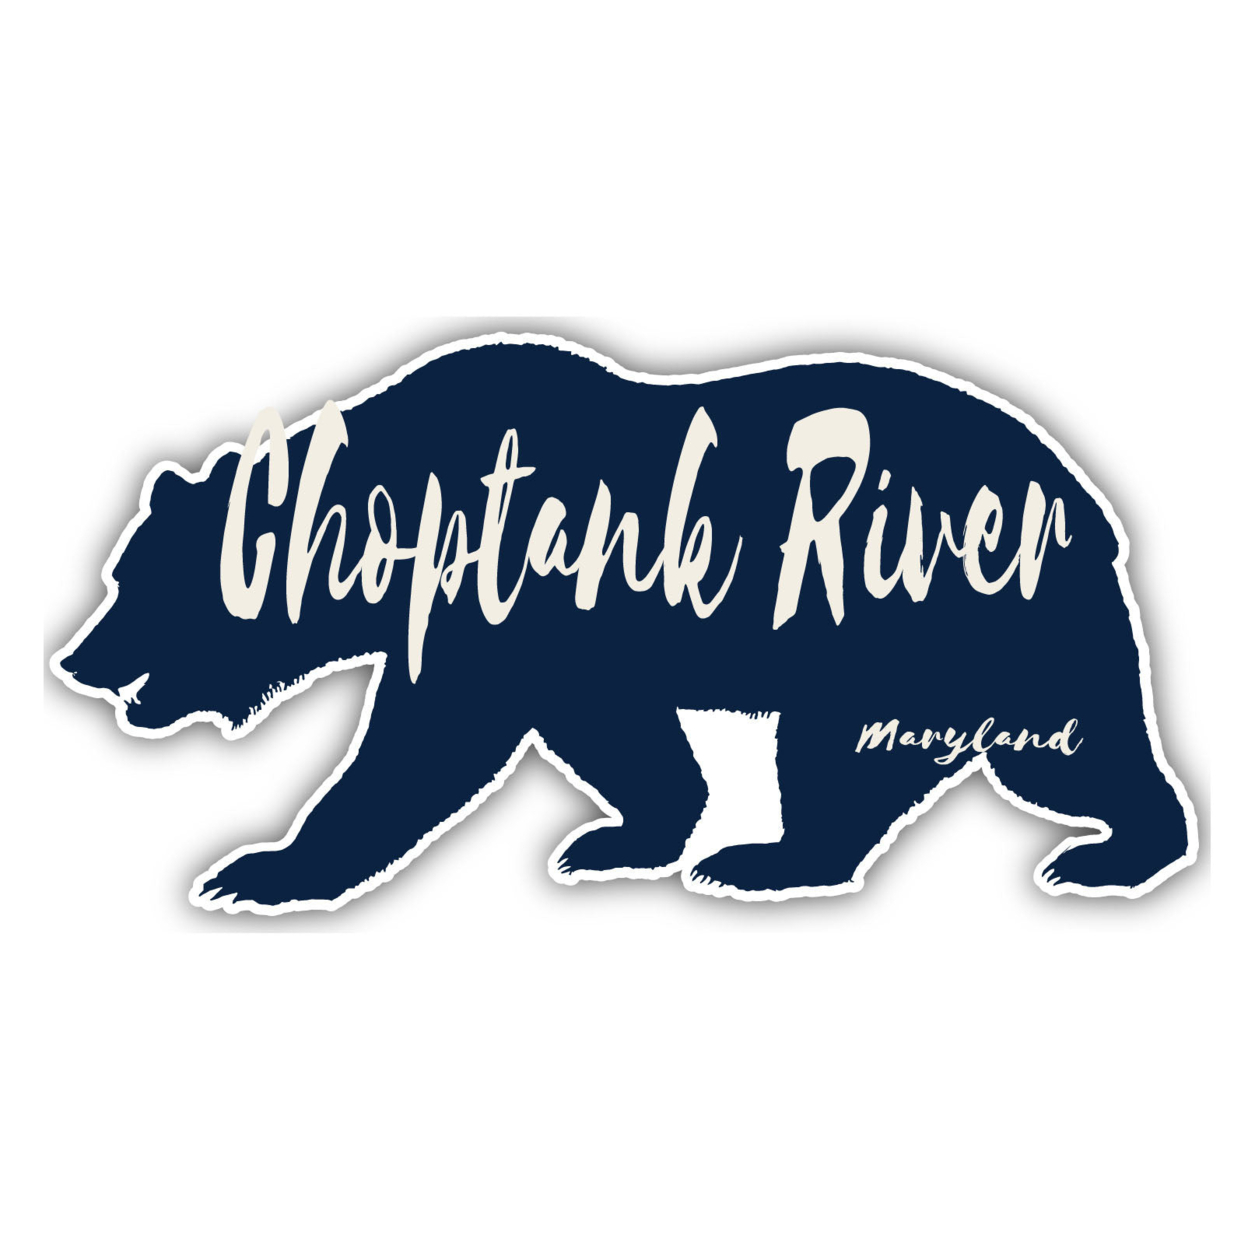 Choptank River Maryland Souvenir Decorative Stickers (Choose Theme And Size) - 4-Pack, 10-Inch, Bear